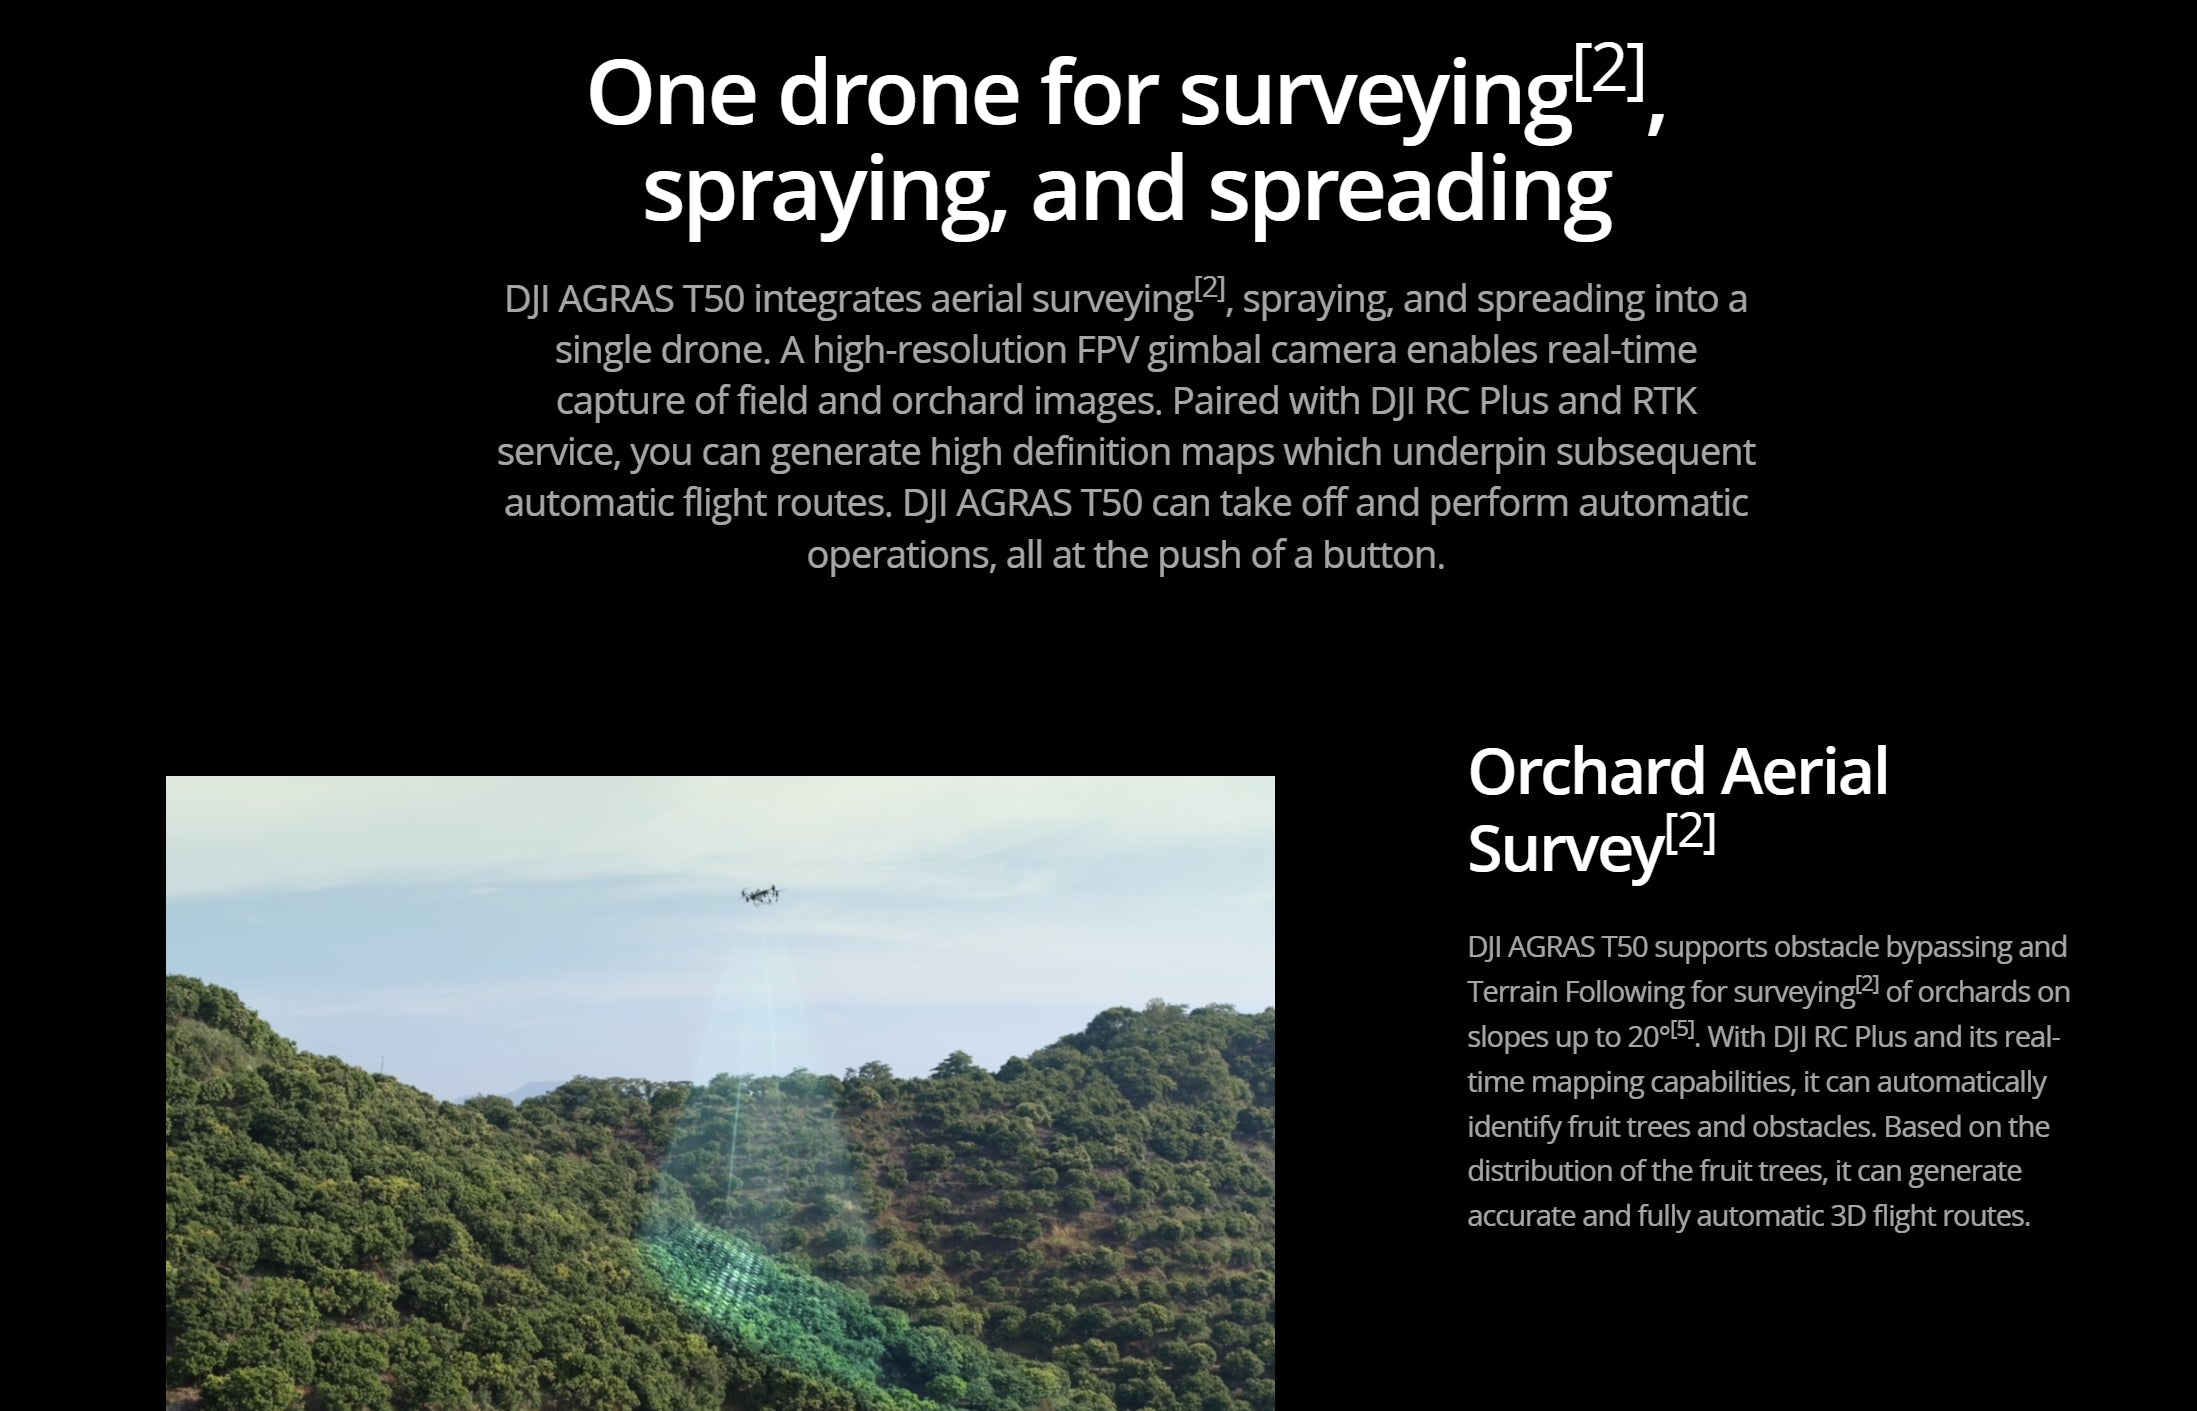 DJI Agras T50 , DJI Agras T50: single drone for surveying, spraying, and spreading with advanced camera and mapping capabilities.